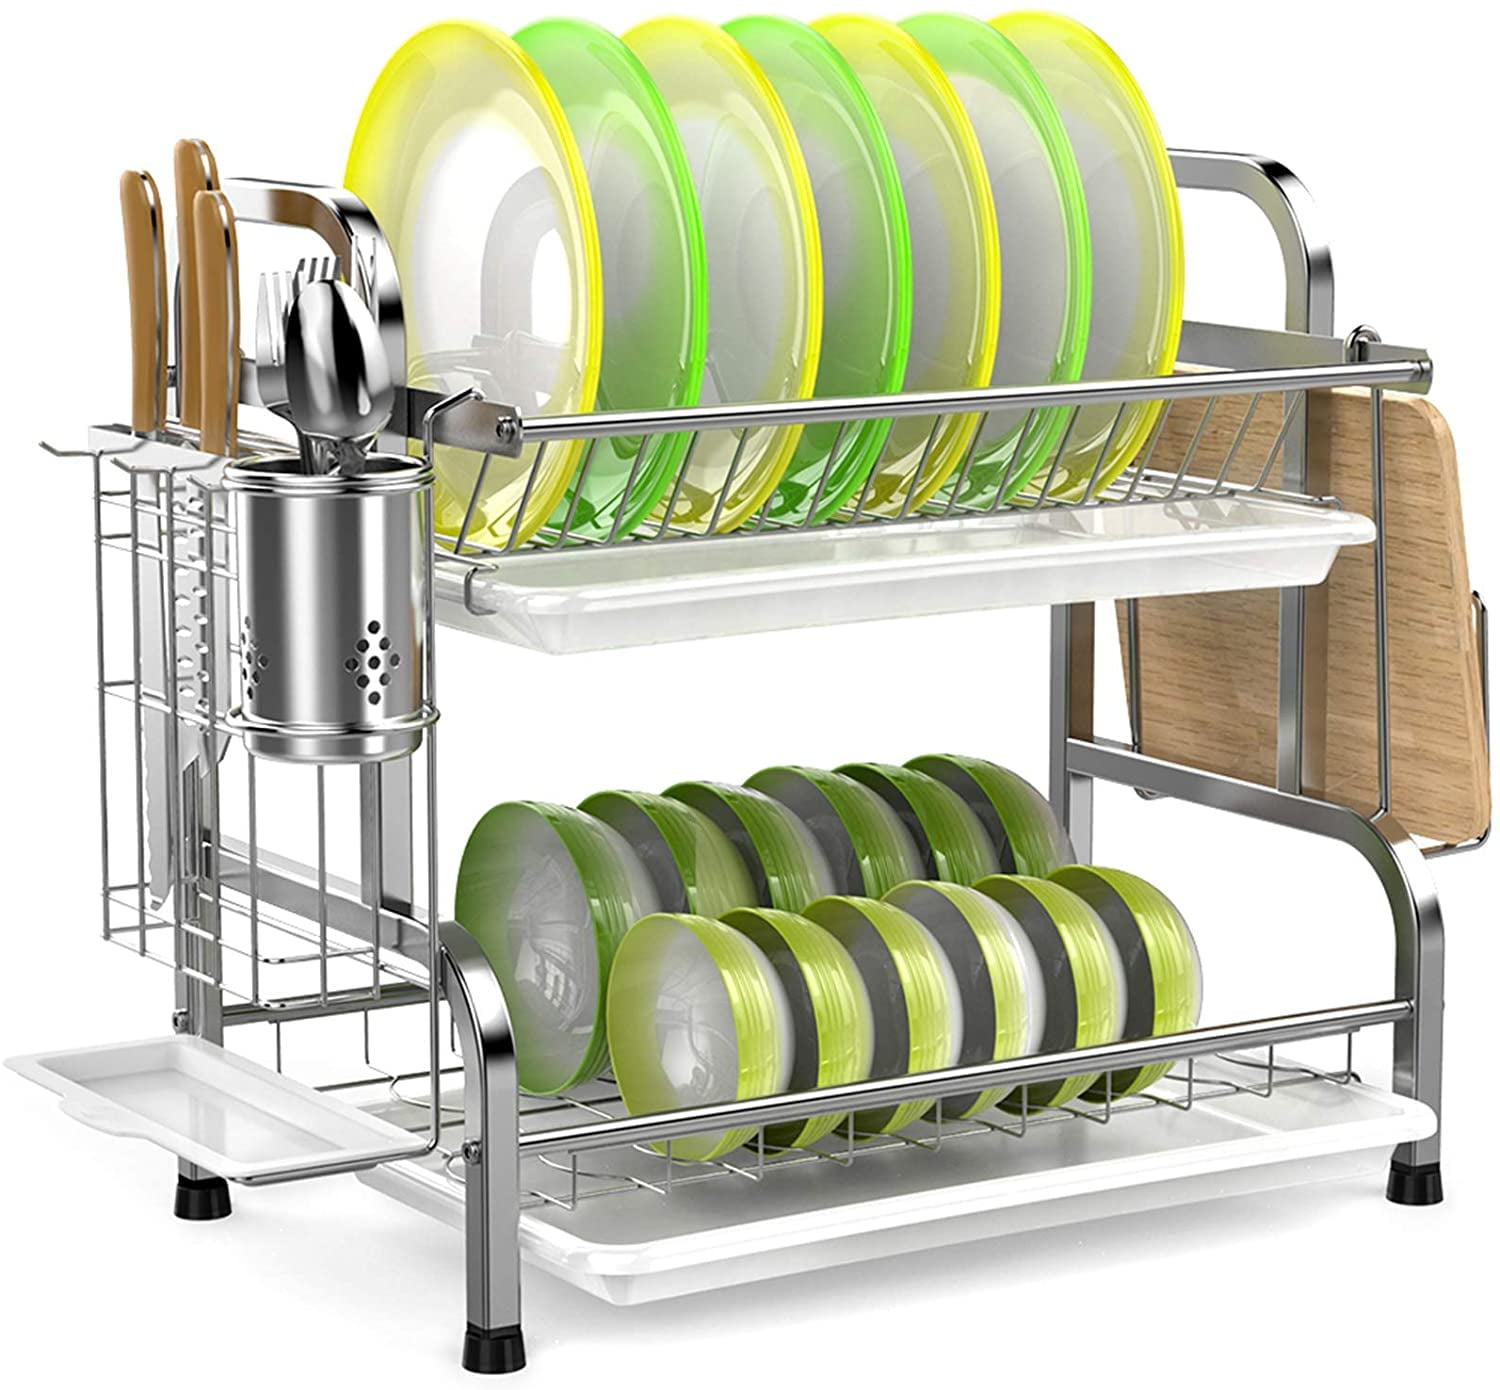  slhsy Dish Drying Rack,2 Tier Dish Racks for Kitchen